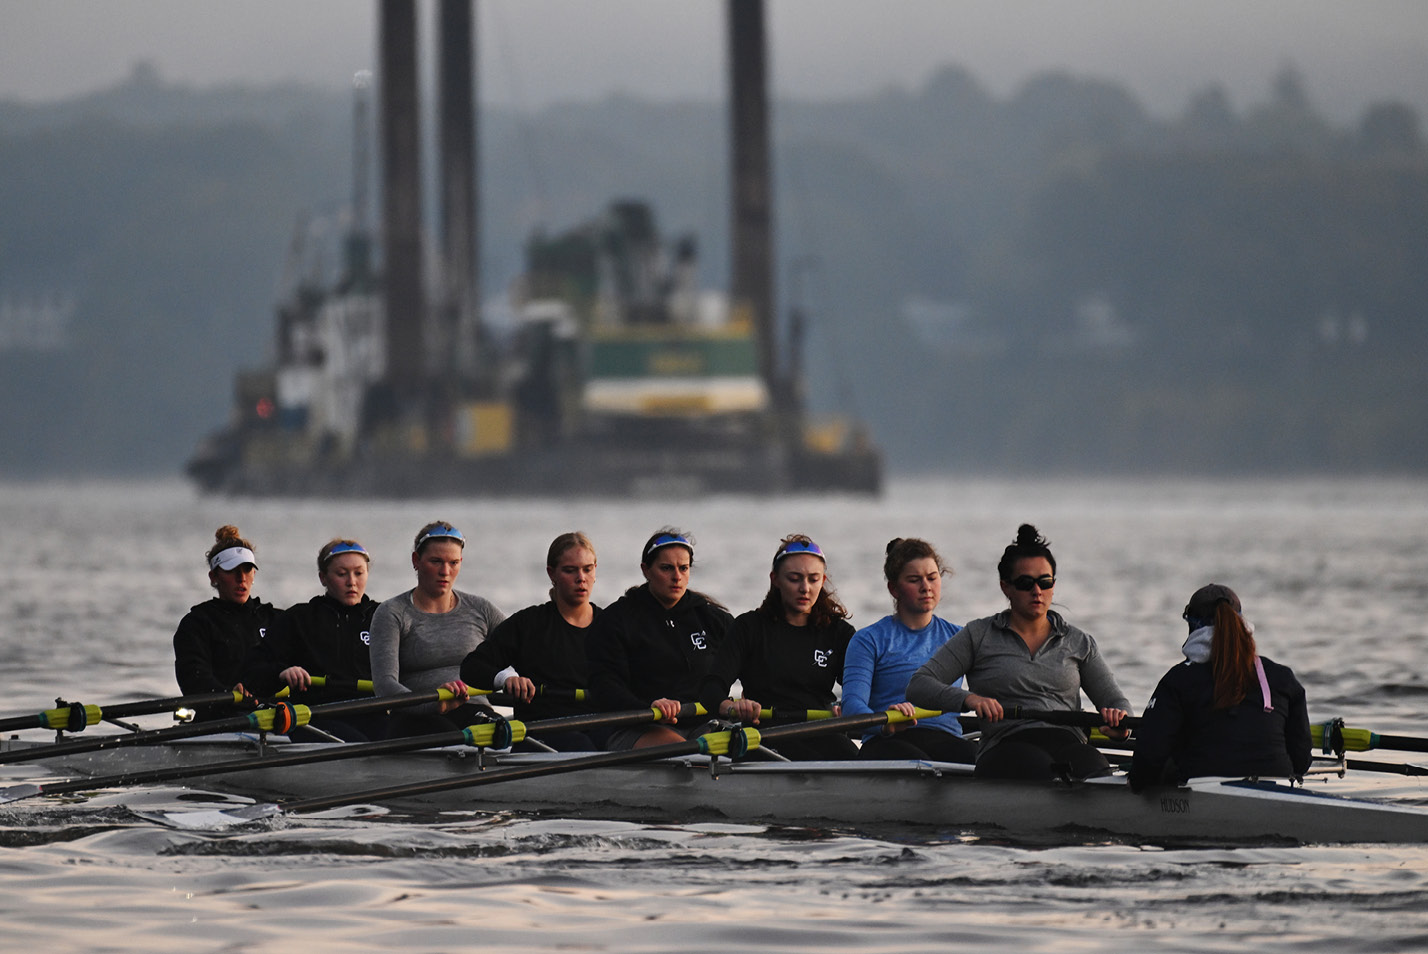 Womens crew rows on the Thames River at dawn in October.